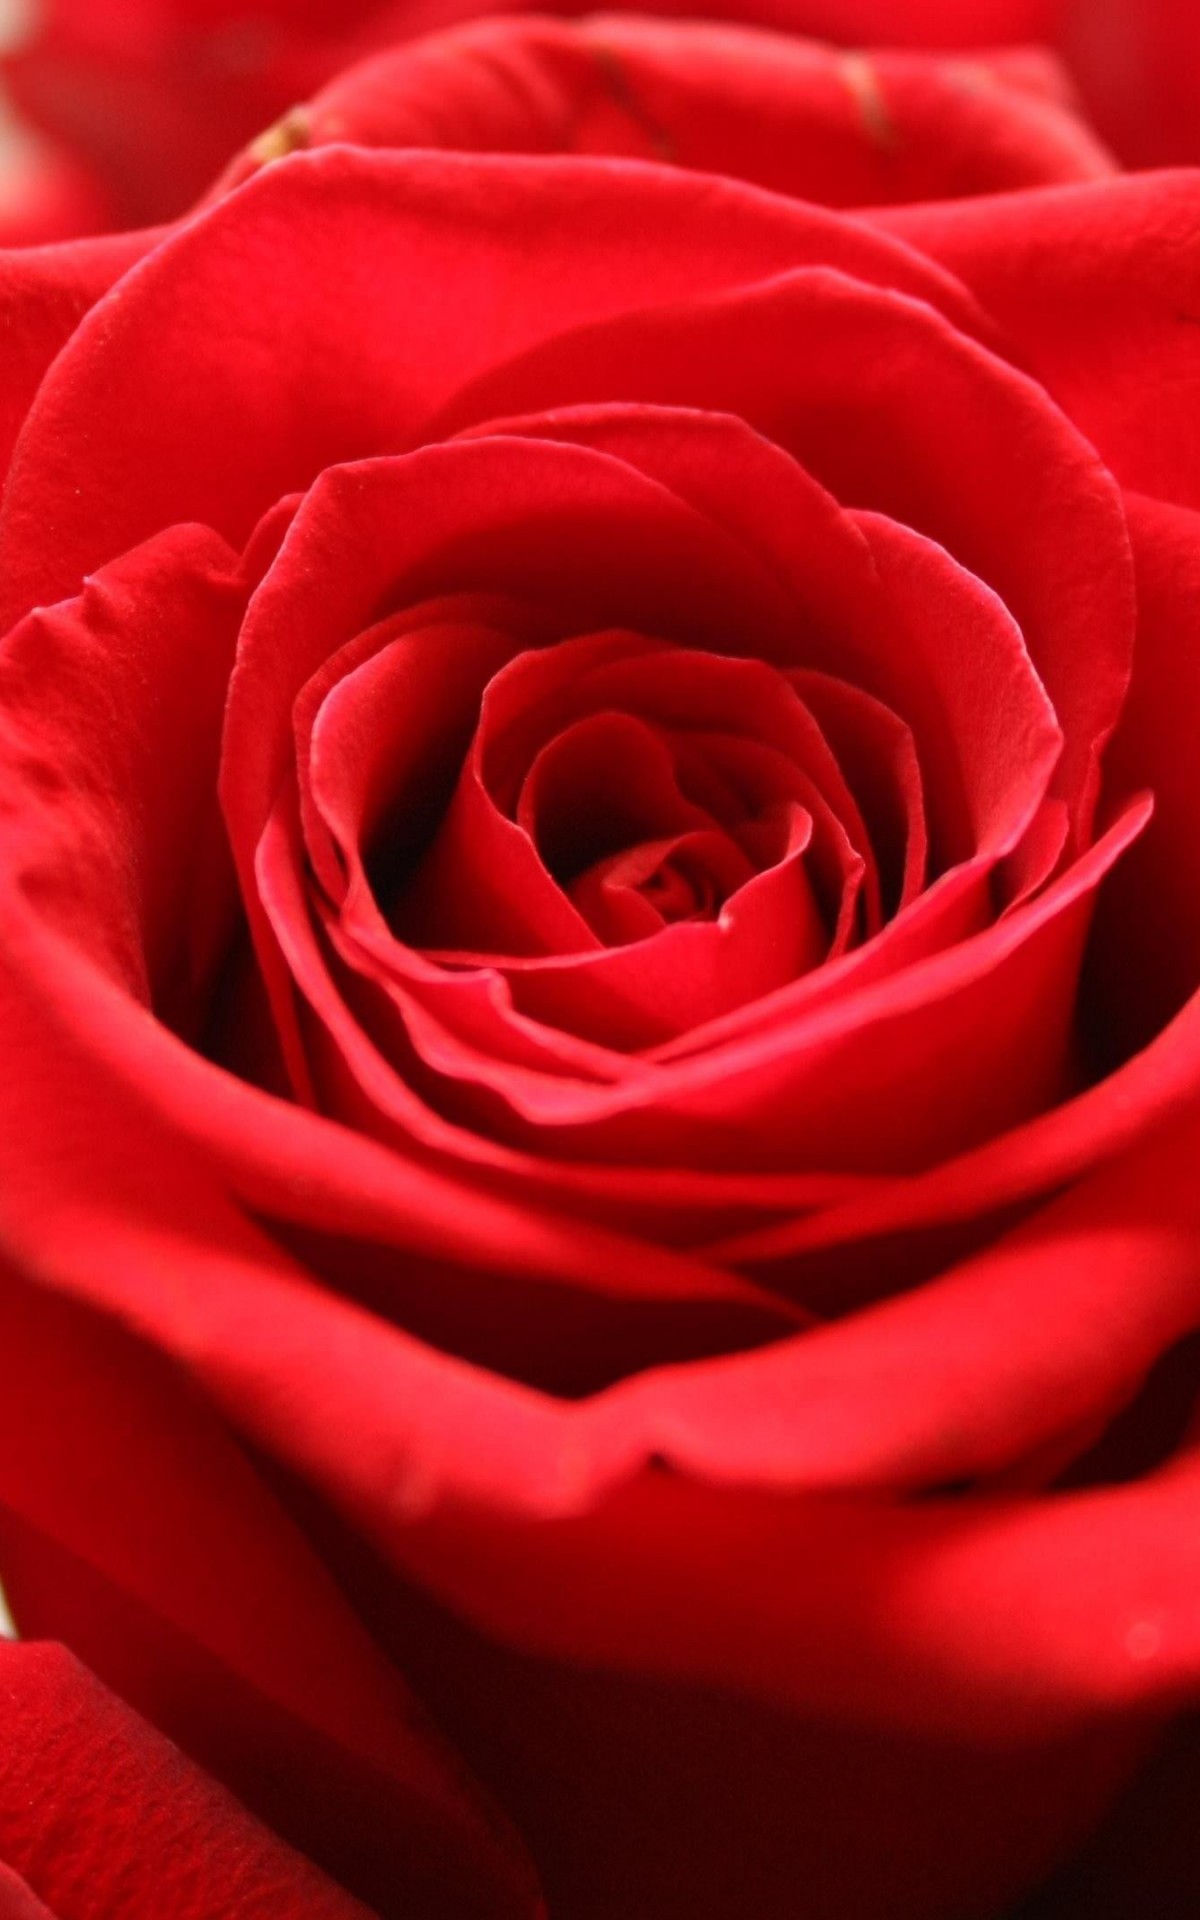 Red Rose Wallpaper for Amazon Kindle Fire HDX